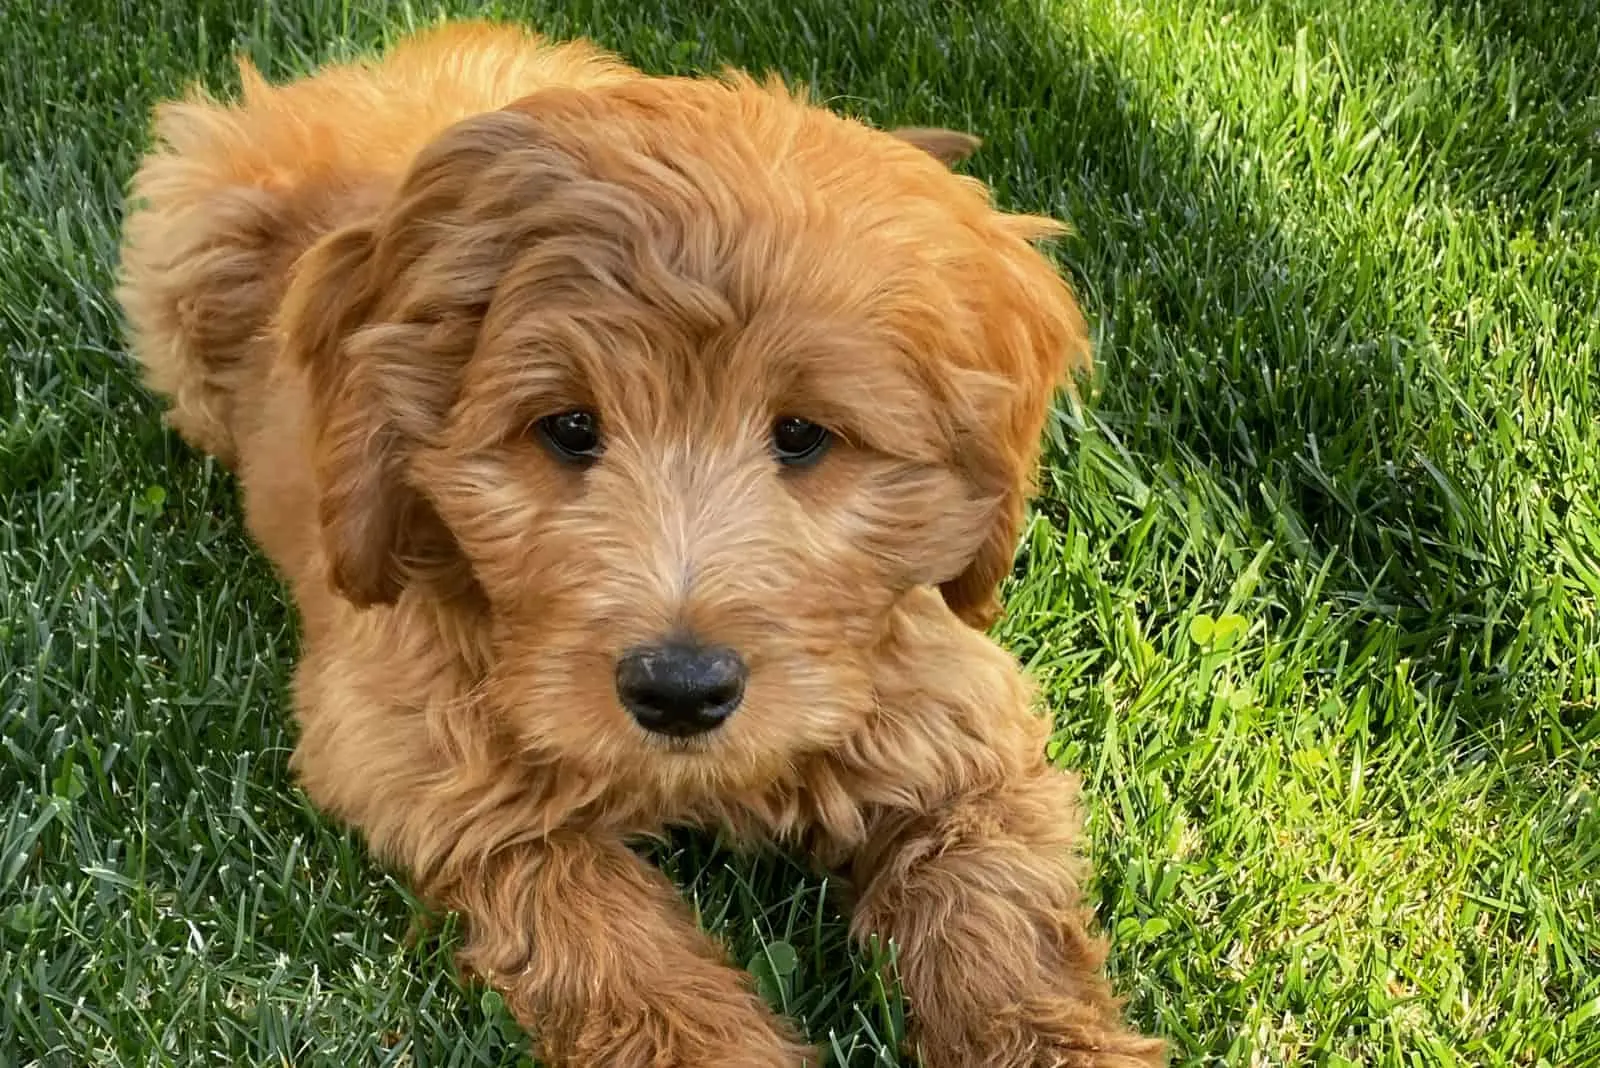 F2b Goldendoodle rests in the grass